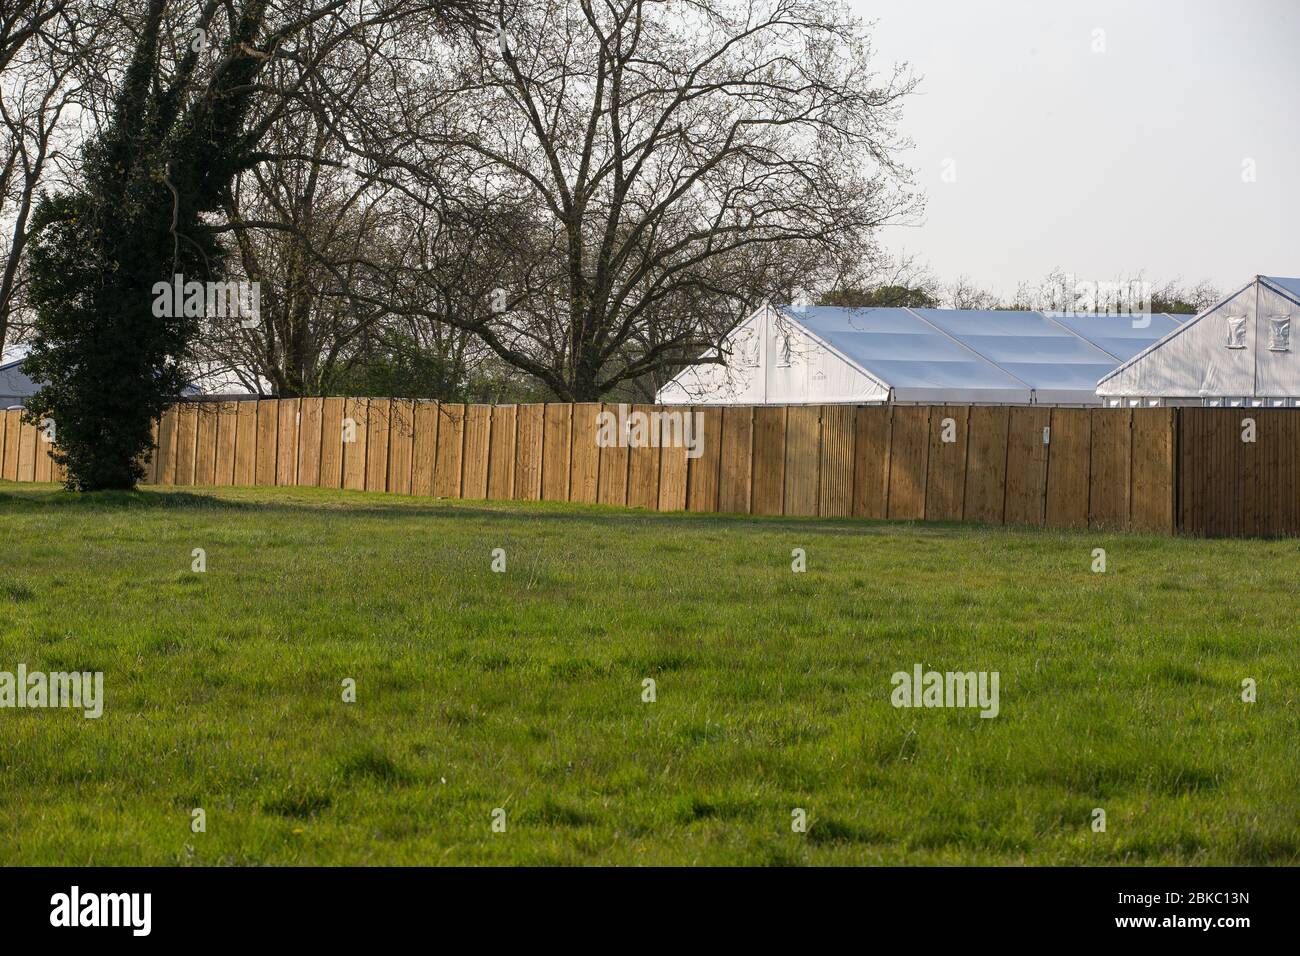 A temporary mortuary built on open park land at Wanstead Flats in East London during the Coronavirus COVID-19 pandemic in 2020 Stock Photo